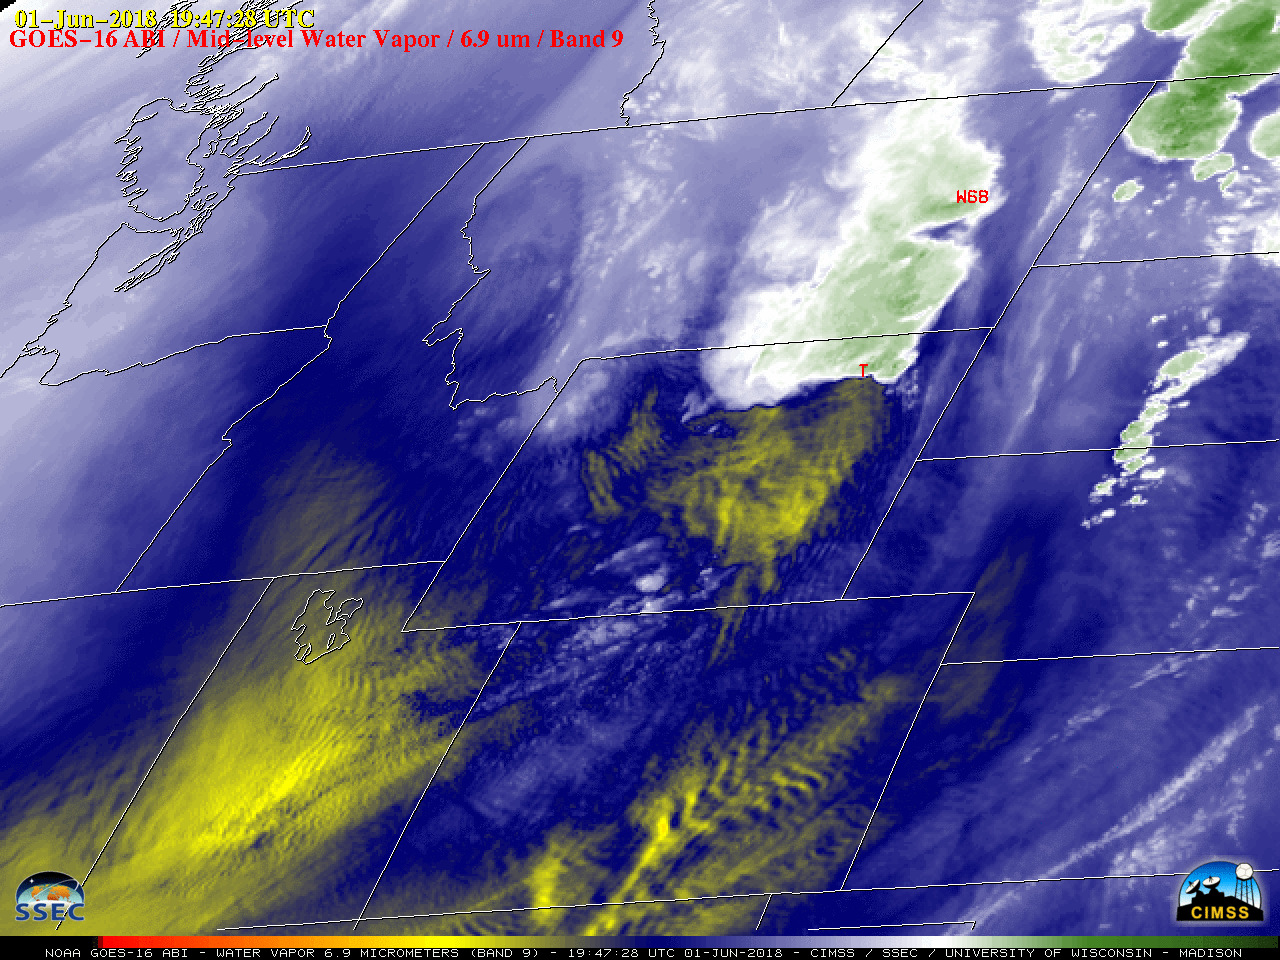 GOES-16 Mid-level Water Vapor (6.9 µm) images, with plots of SPC storm reports [click to play MP4 animation]